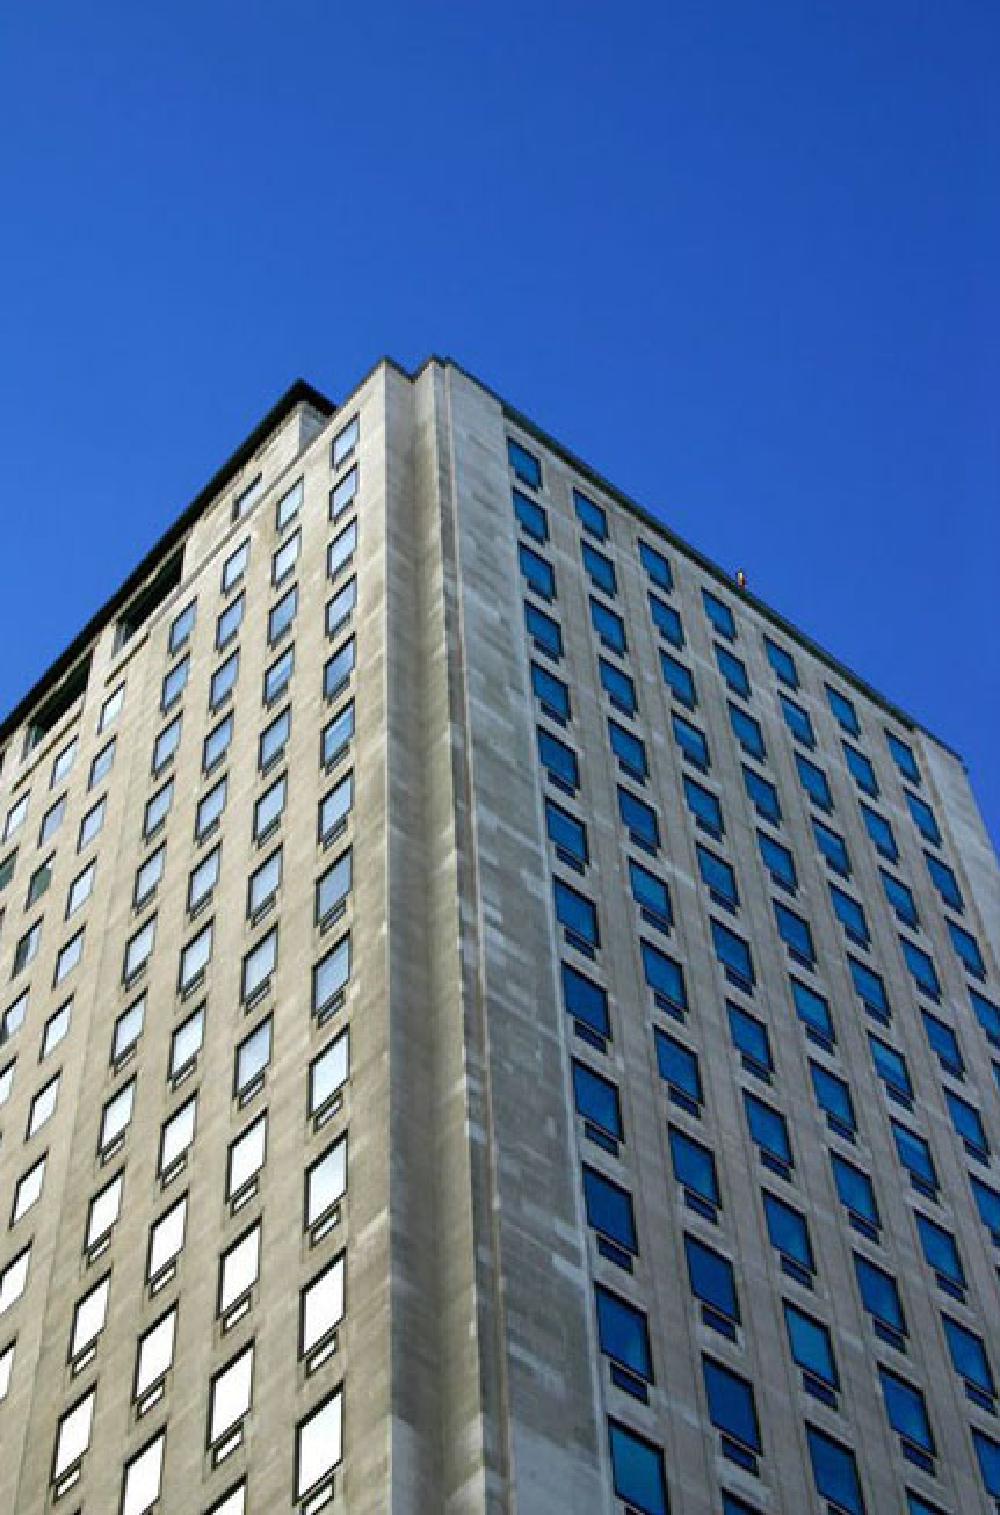 The Shell Centre